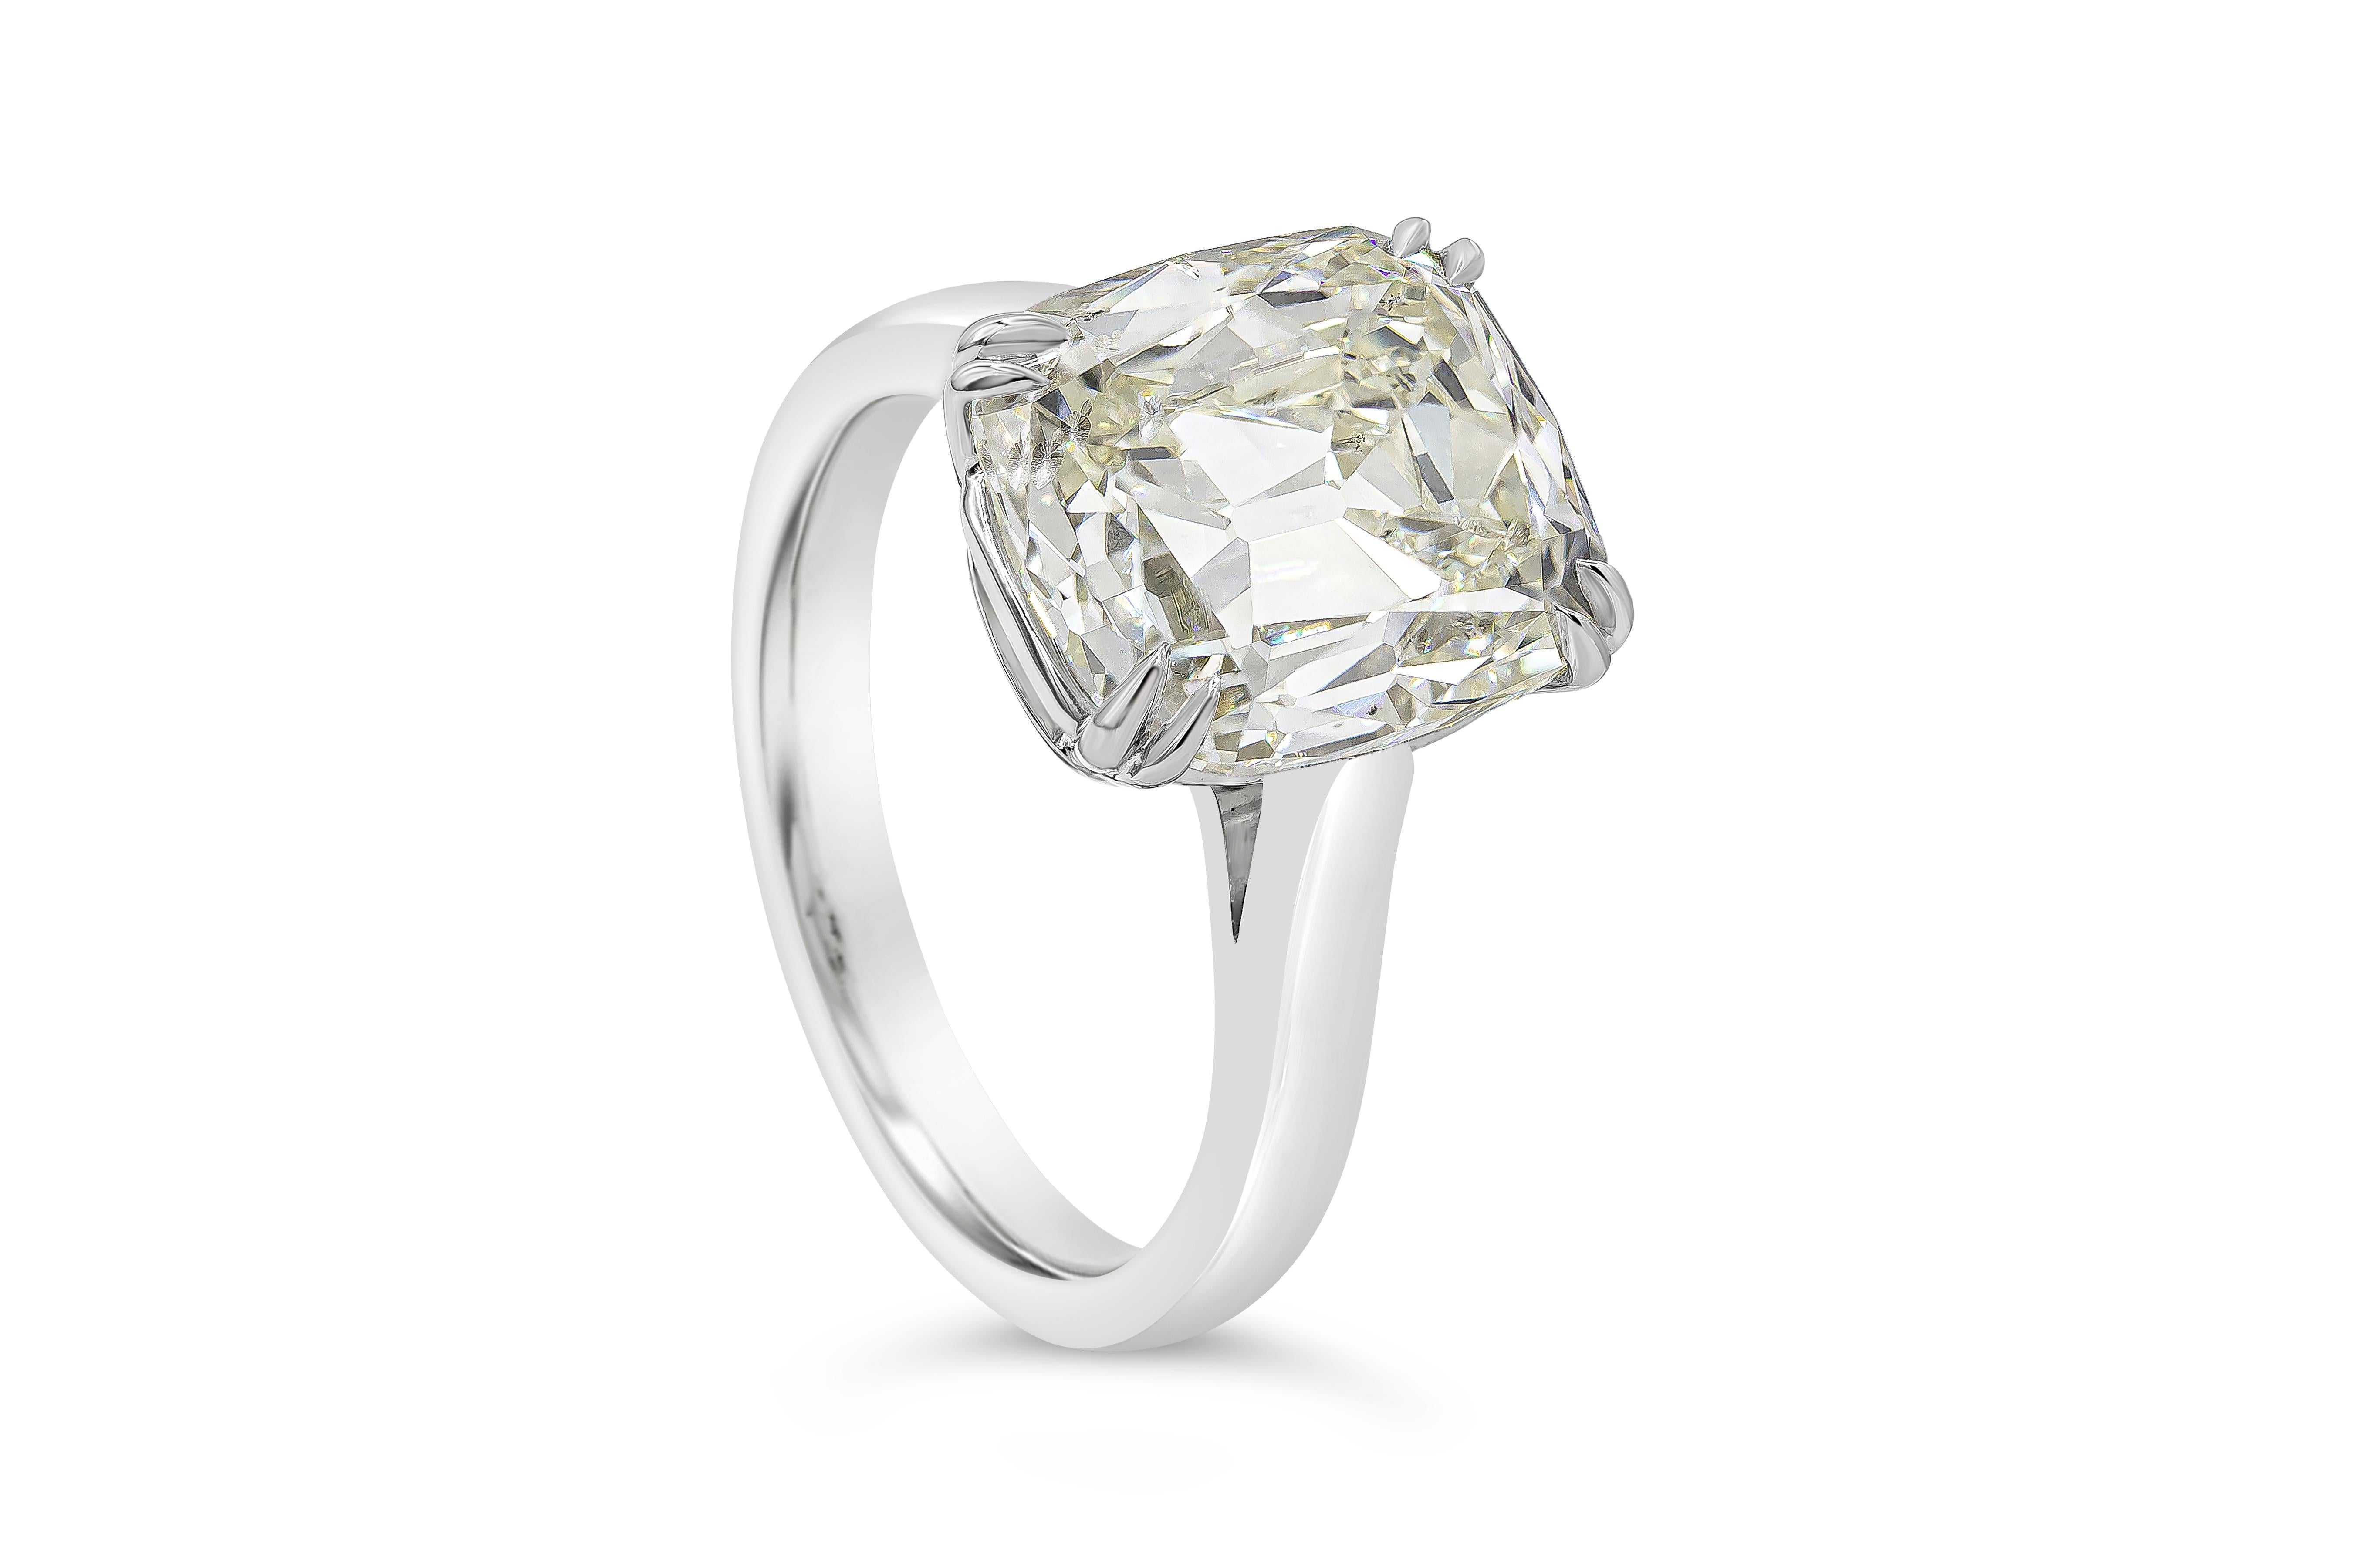 A timeless engagement ring style showcasing a GIA Certified 5.53 carat cushion cut diamond, M Color and SI2 in Clarity. Made in polished platinum. Size 6 US and resizable upon request. 

Roman Malakov is a custom house, specializing in creating